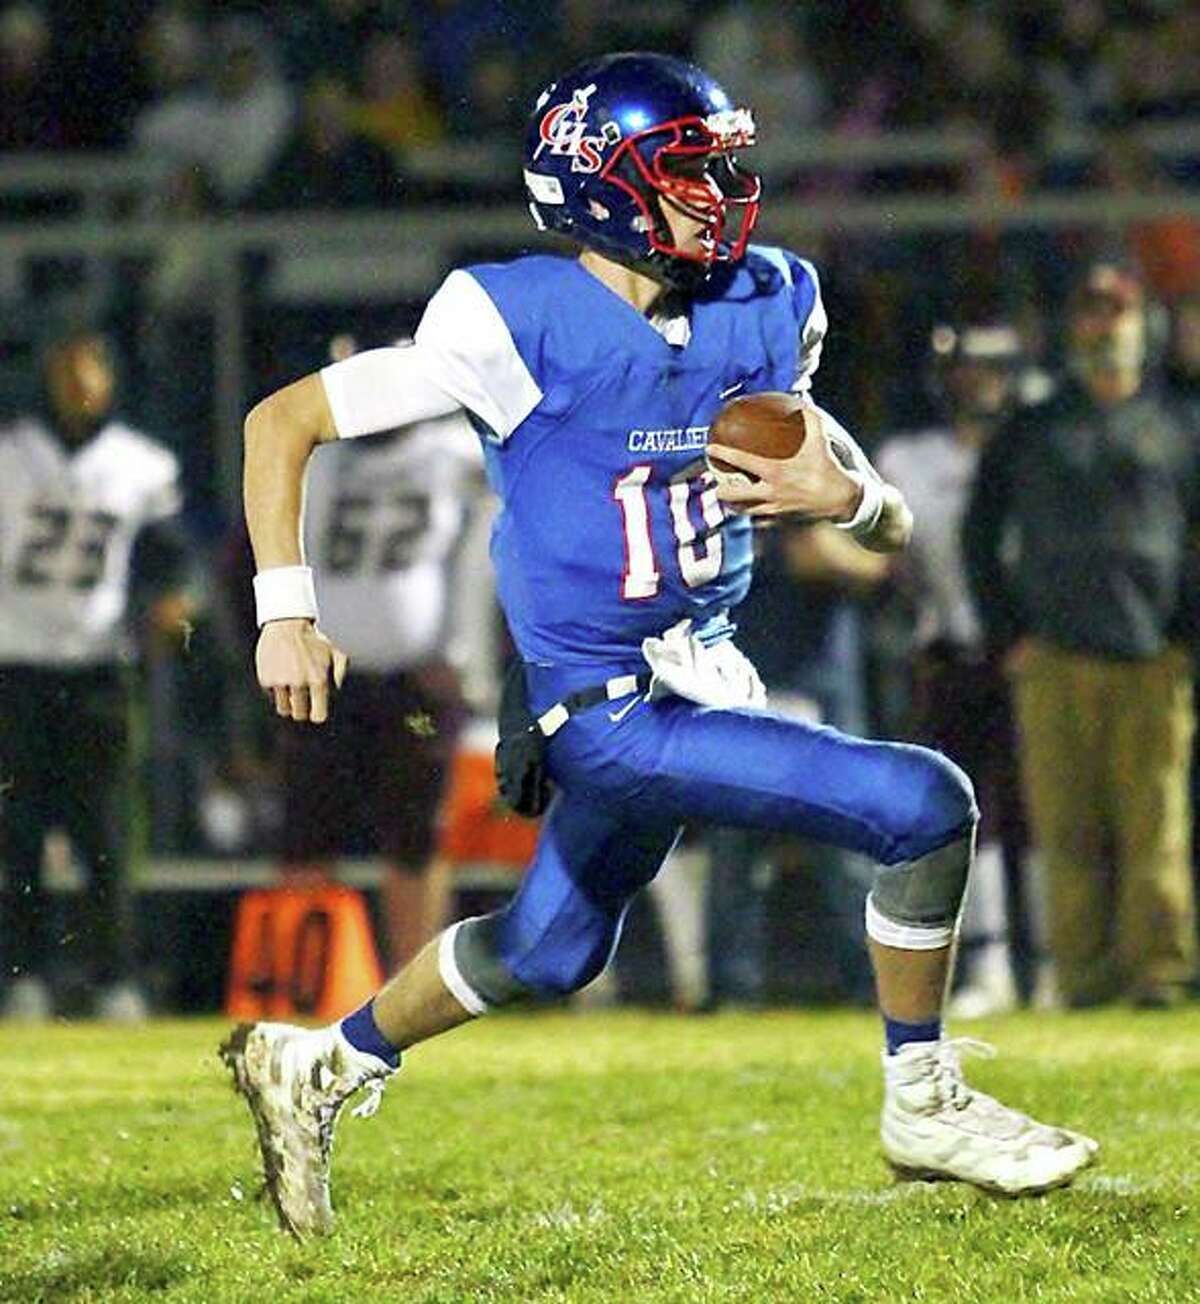 Carlinville quarterbck Jarret Easterday runs for yardage in last week’s first-round playoff victory over East Alton-Wood River. The Cavies will travel to Paxton Saturday for a 2 p.m. second-round game against Buckley-Loda.